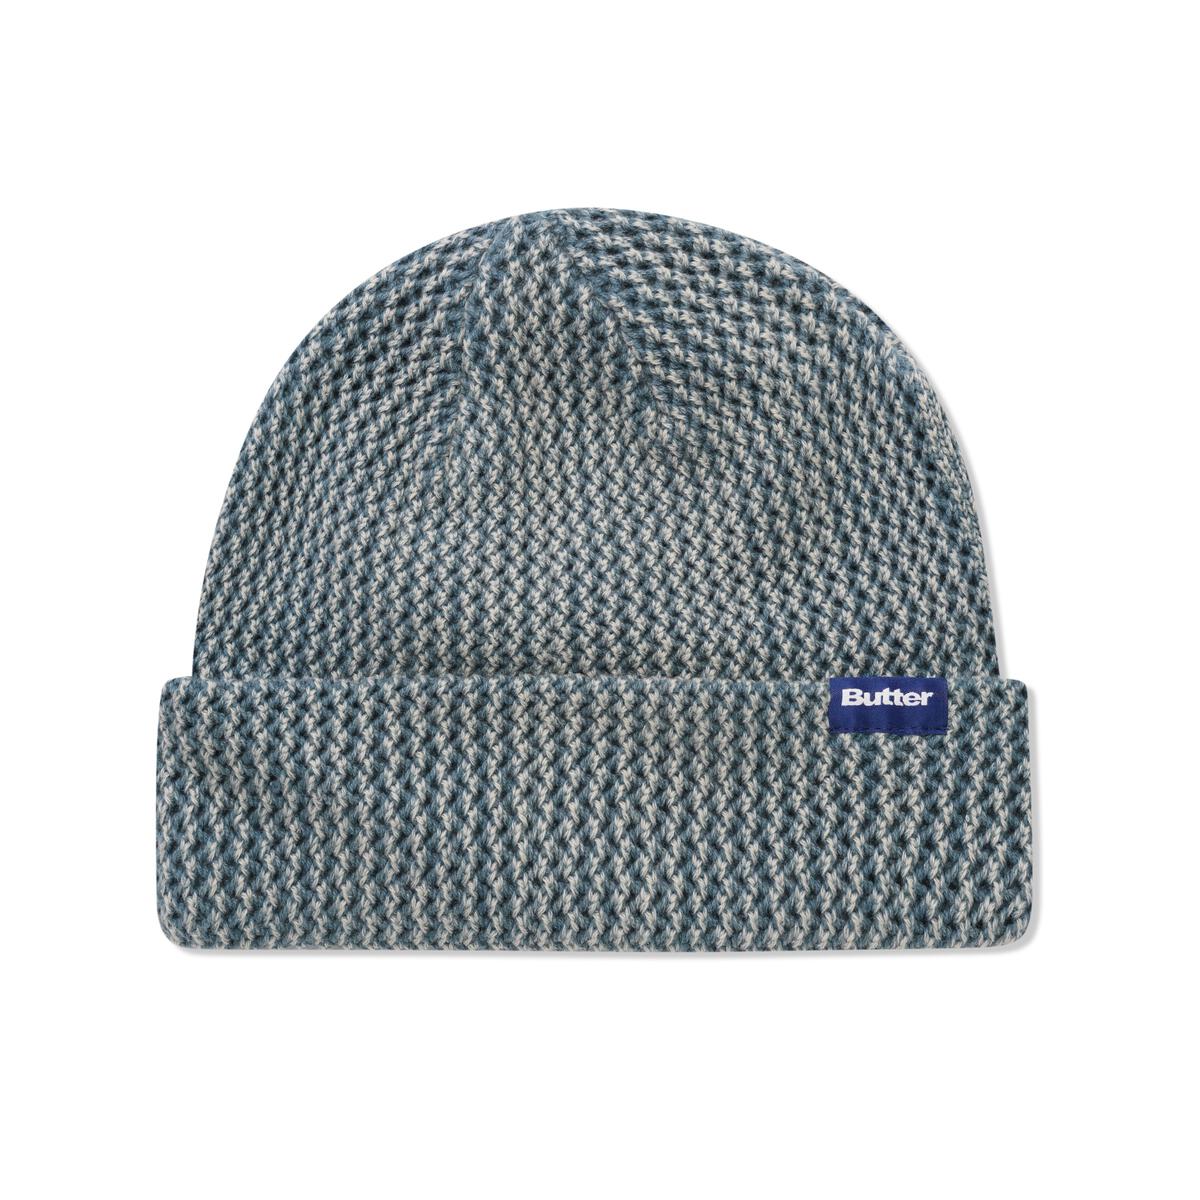 BUTTERGOODS DYED BEANIE WASHED NAVY